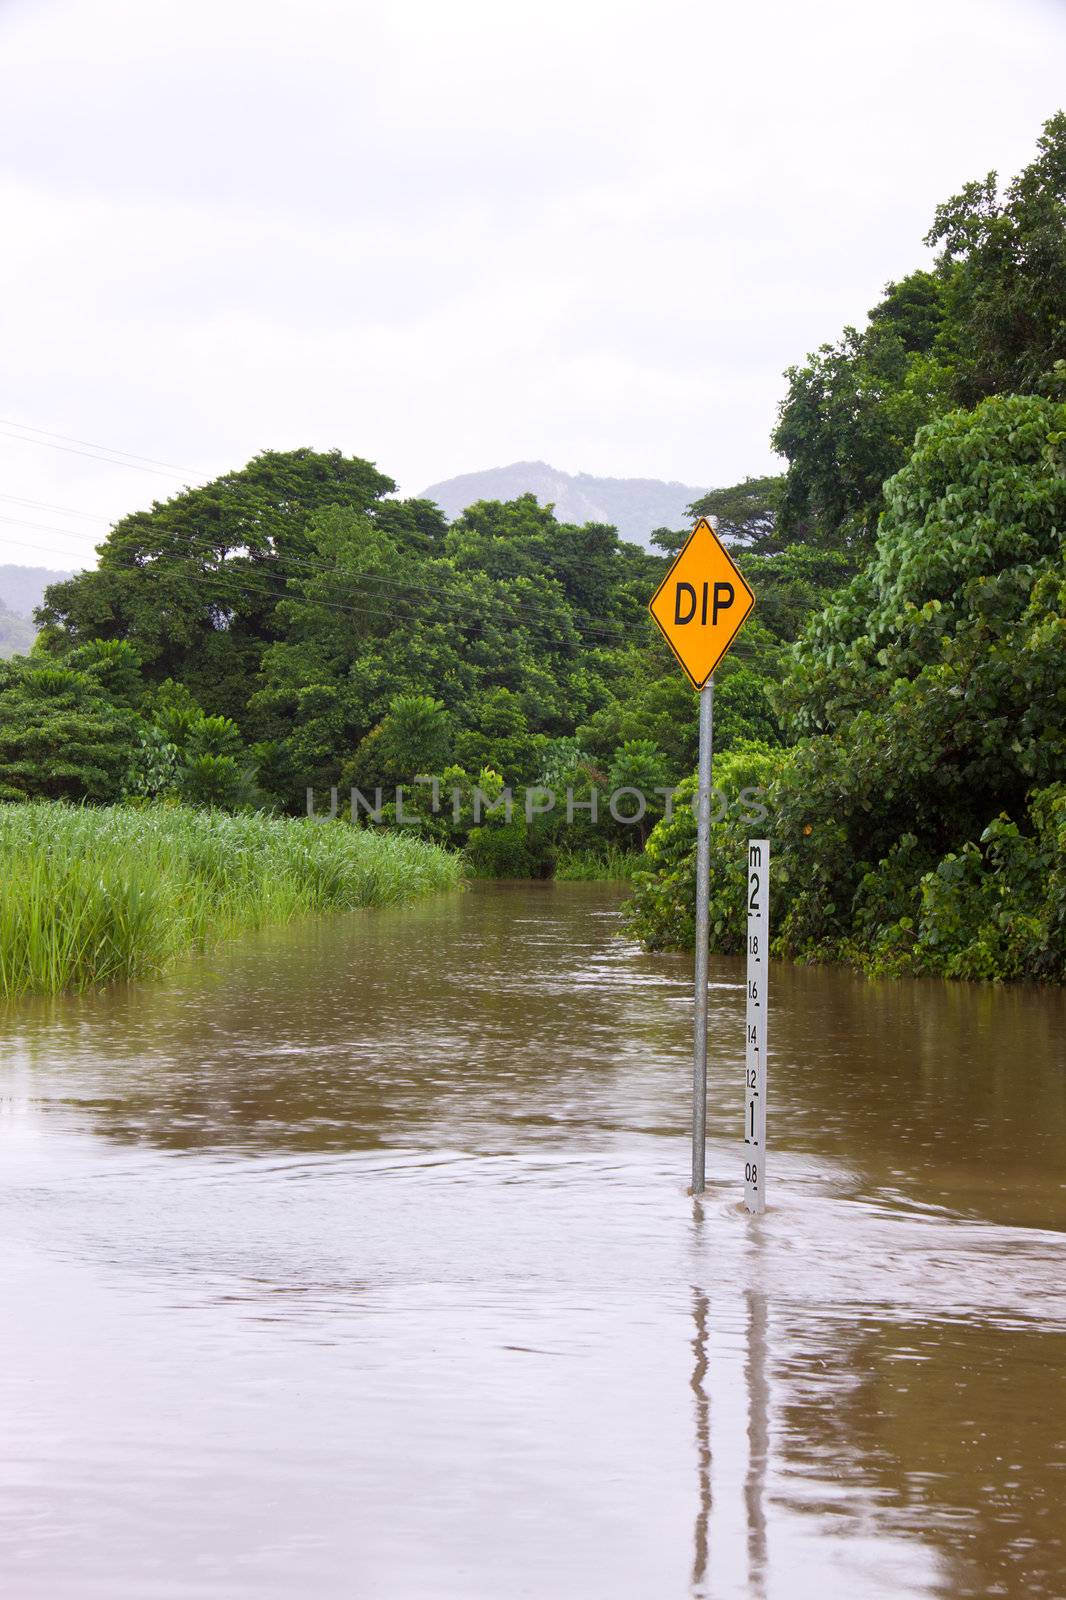 Flooded road with depth indicators in Queensland, Australia by Jaykayl